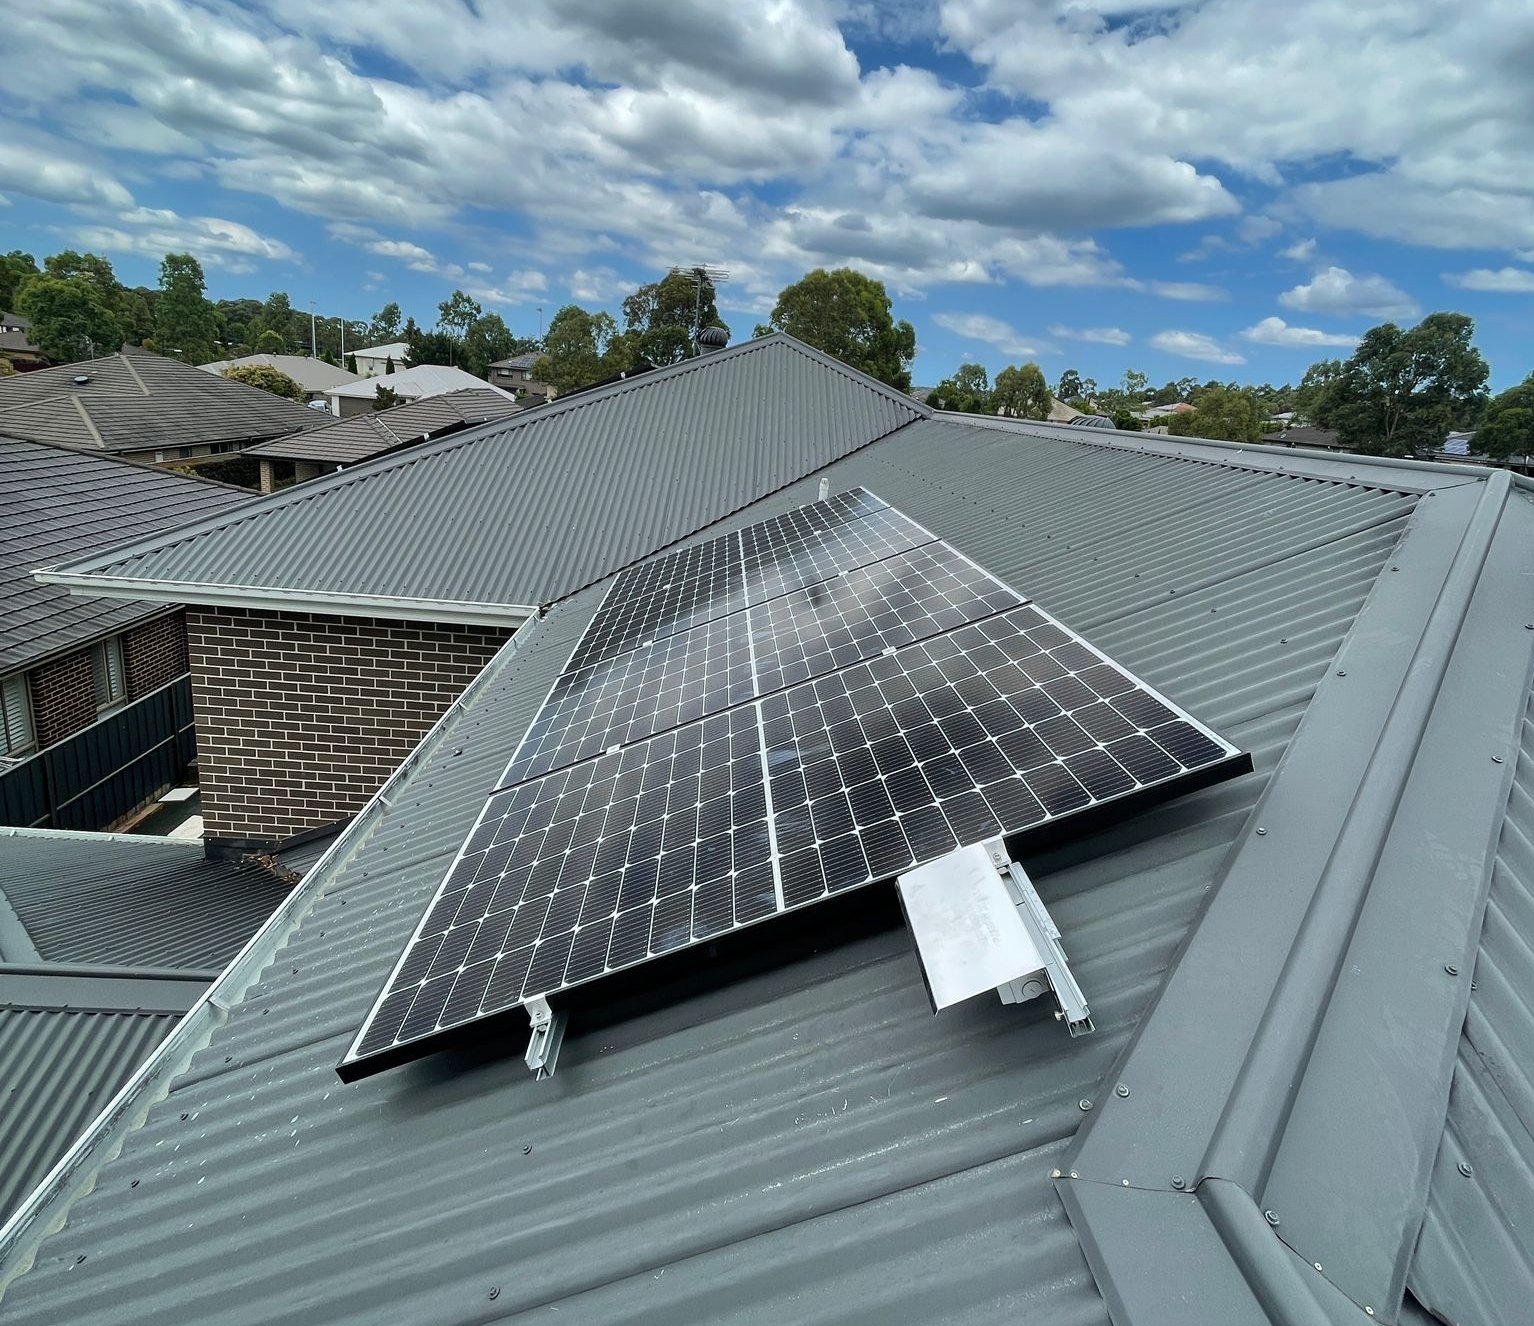 Top Solar System in The Ponds NSW – LG Solar Panels & Enphase microinverters